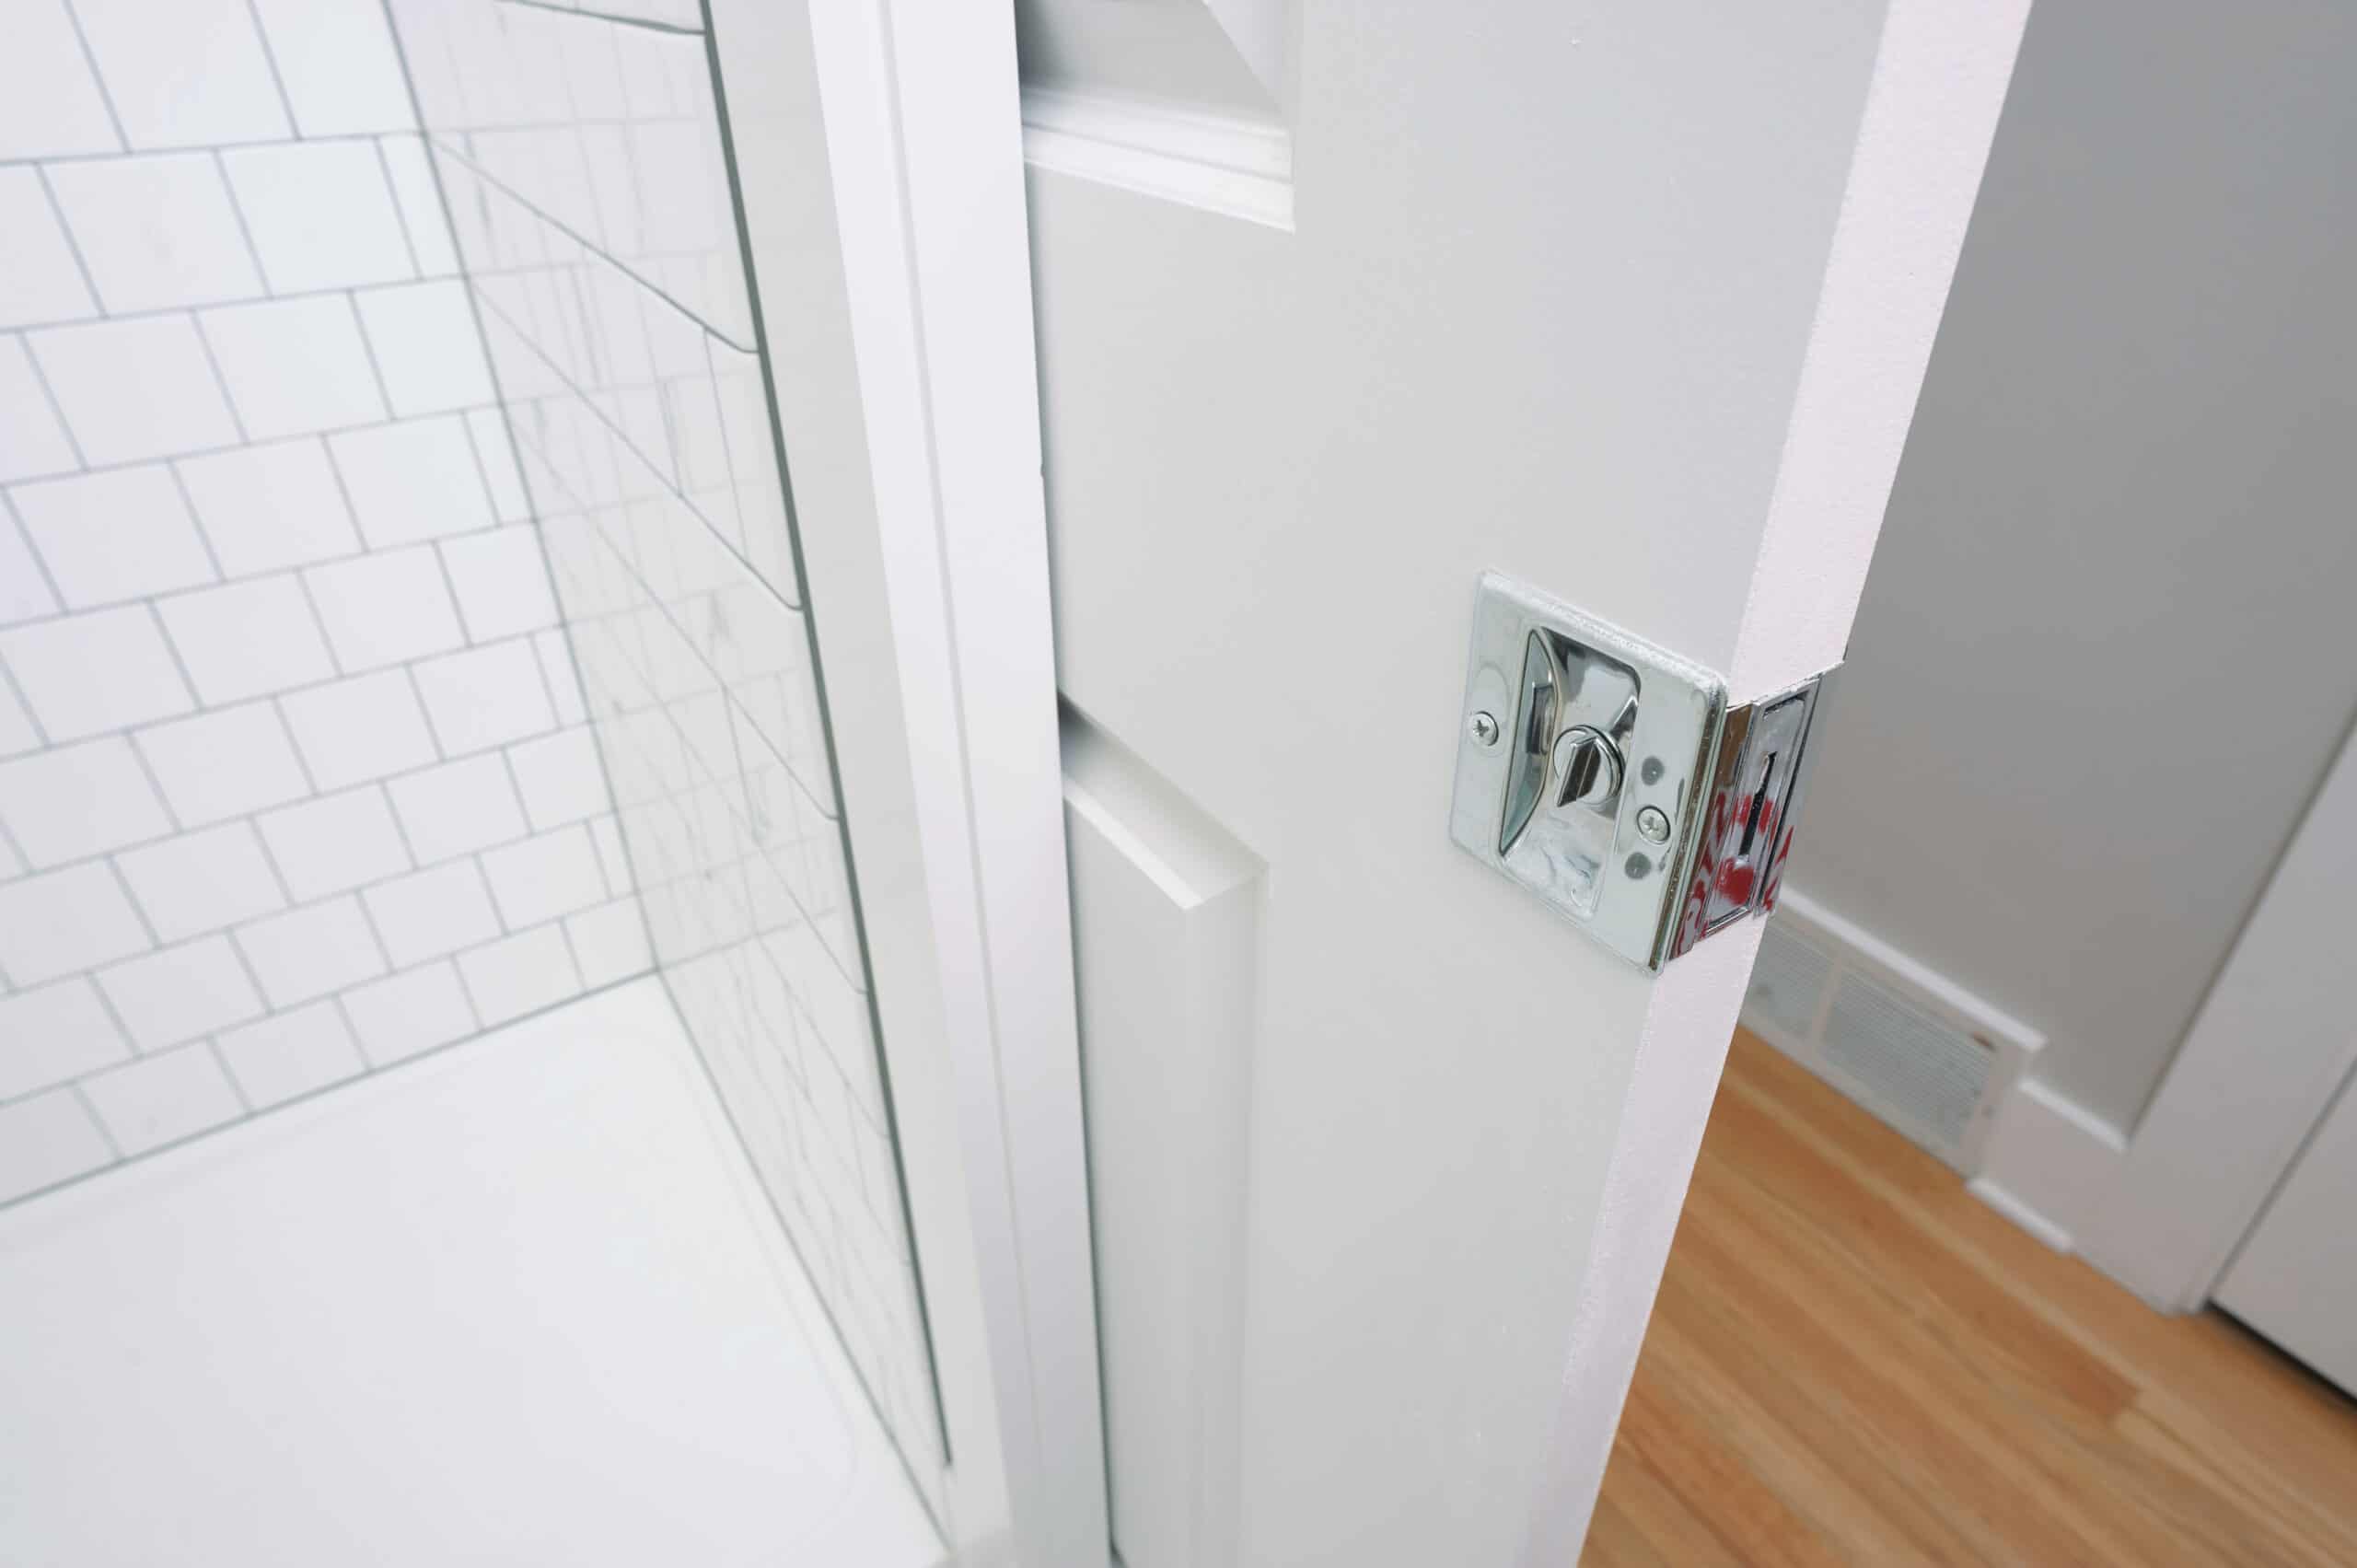 A pocket door saves space in a small bathroom